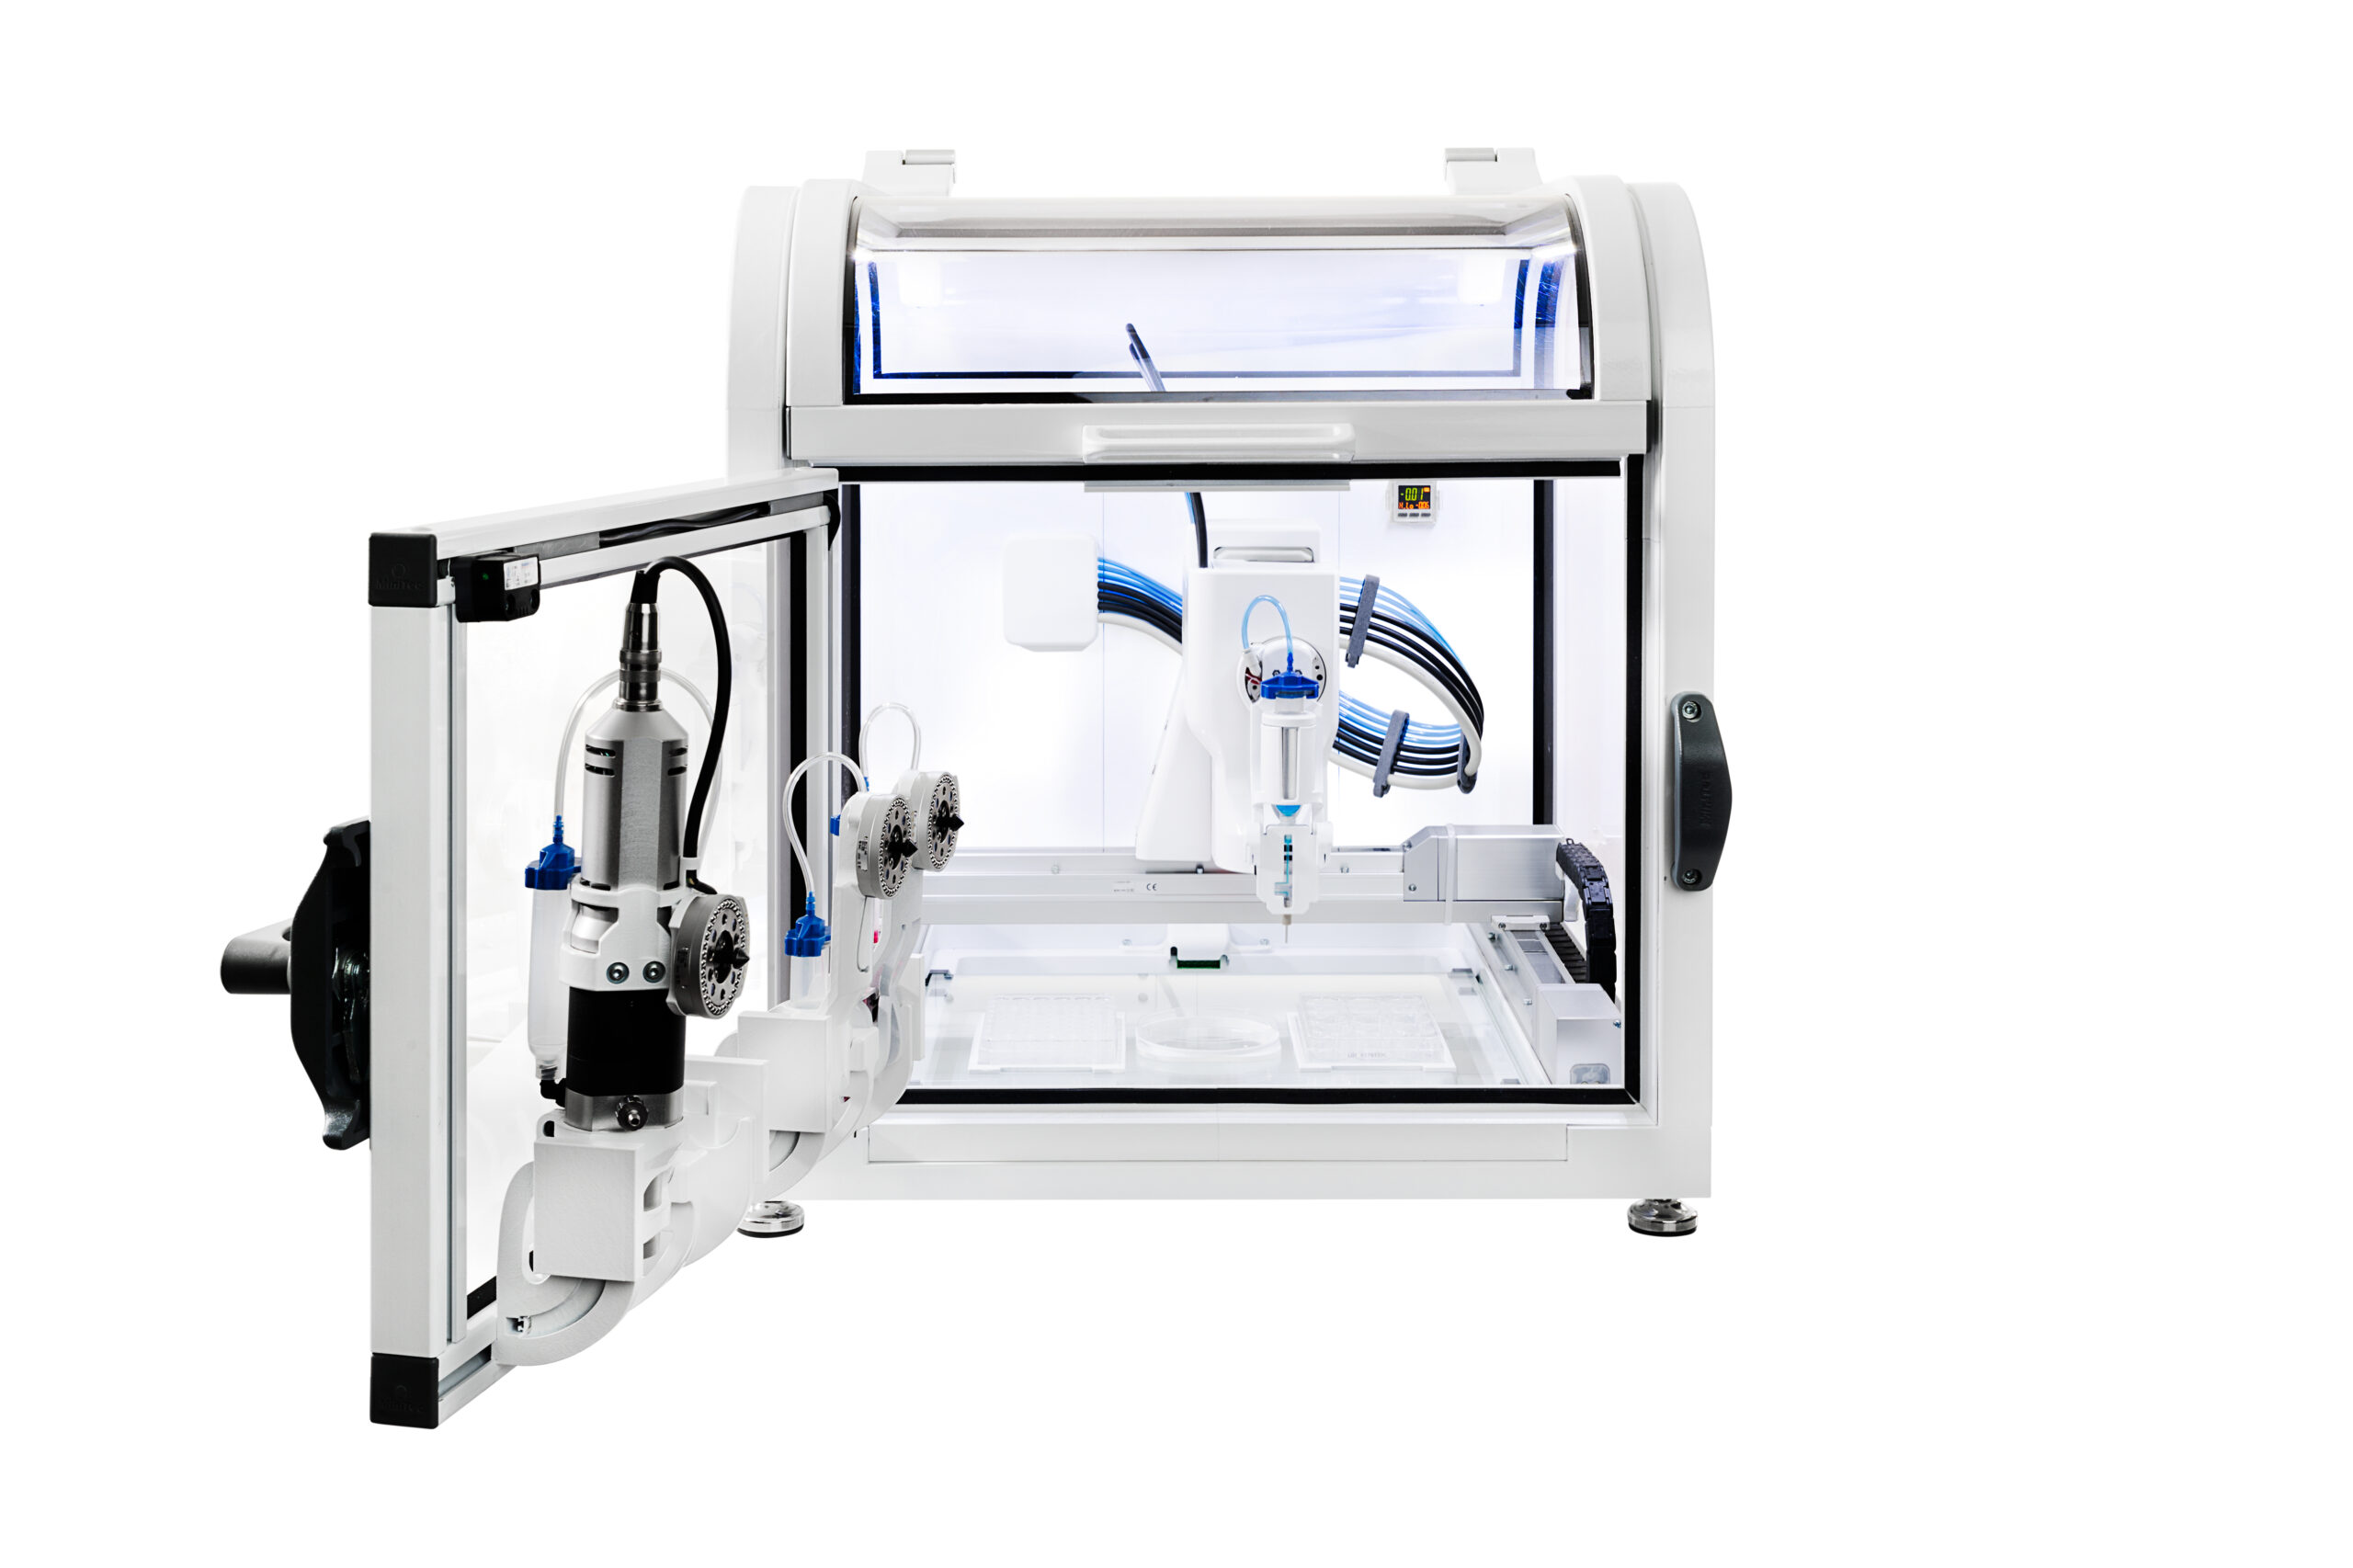 The Brinter® vision: accessible bioprinting for life sciences